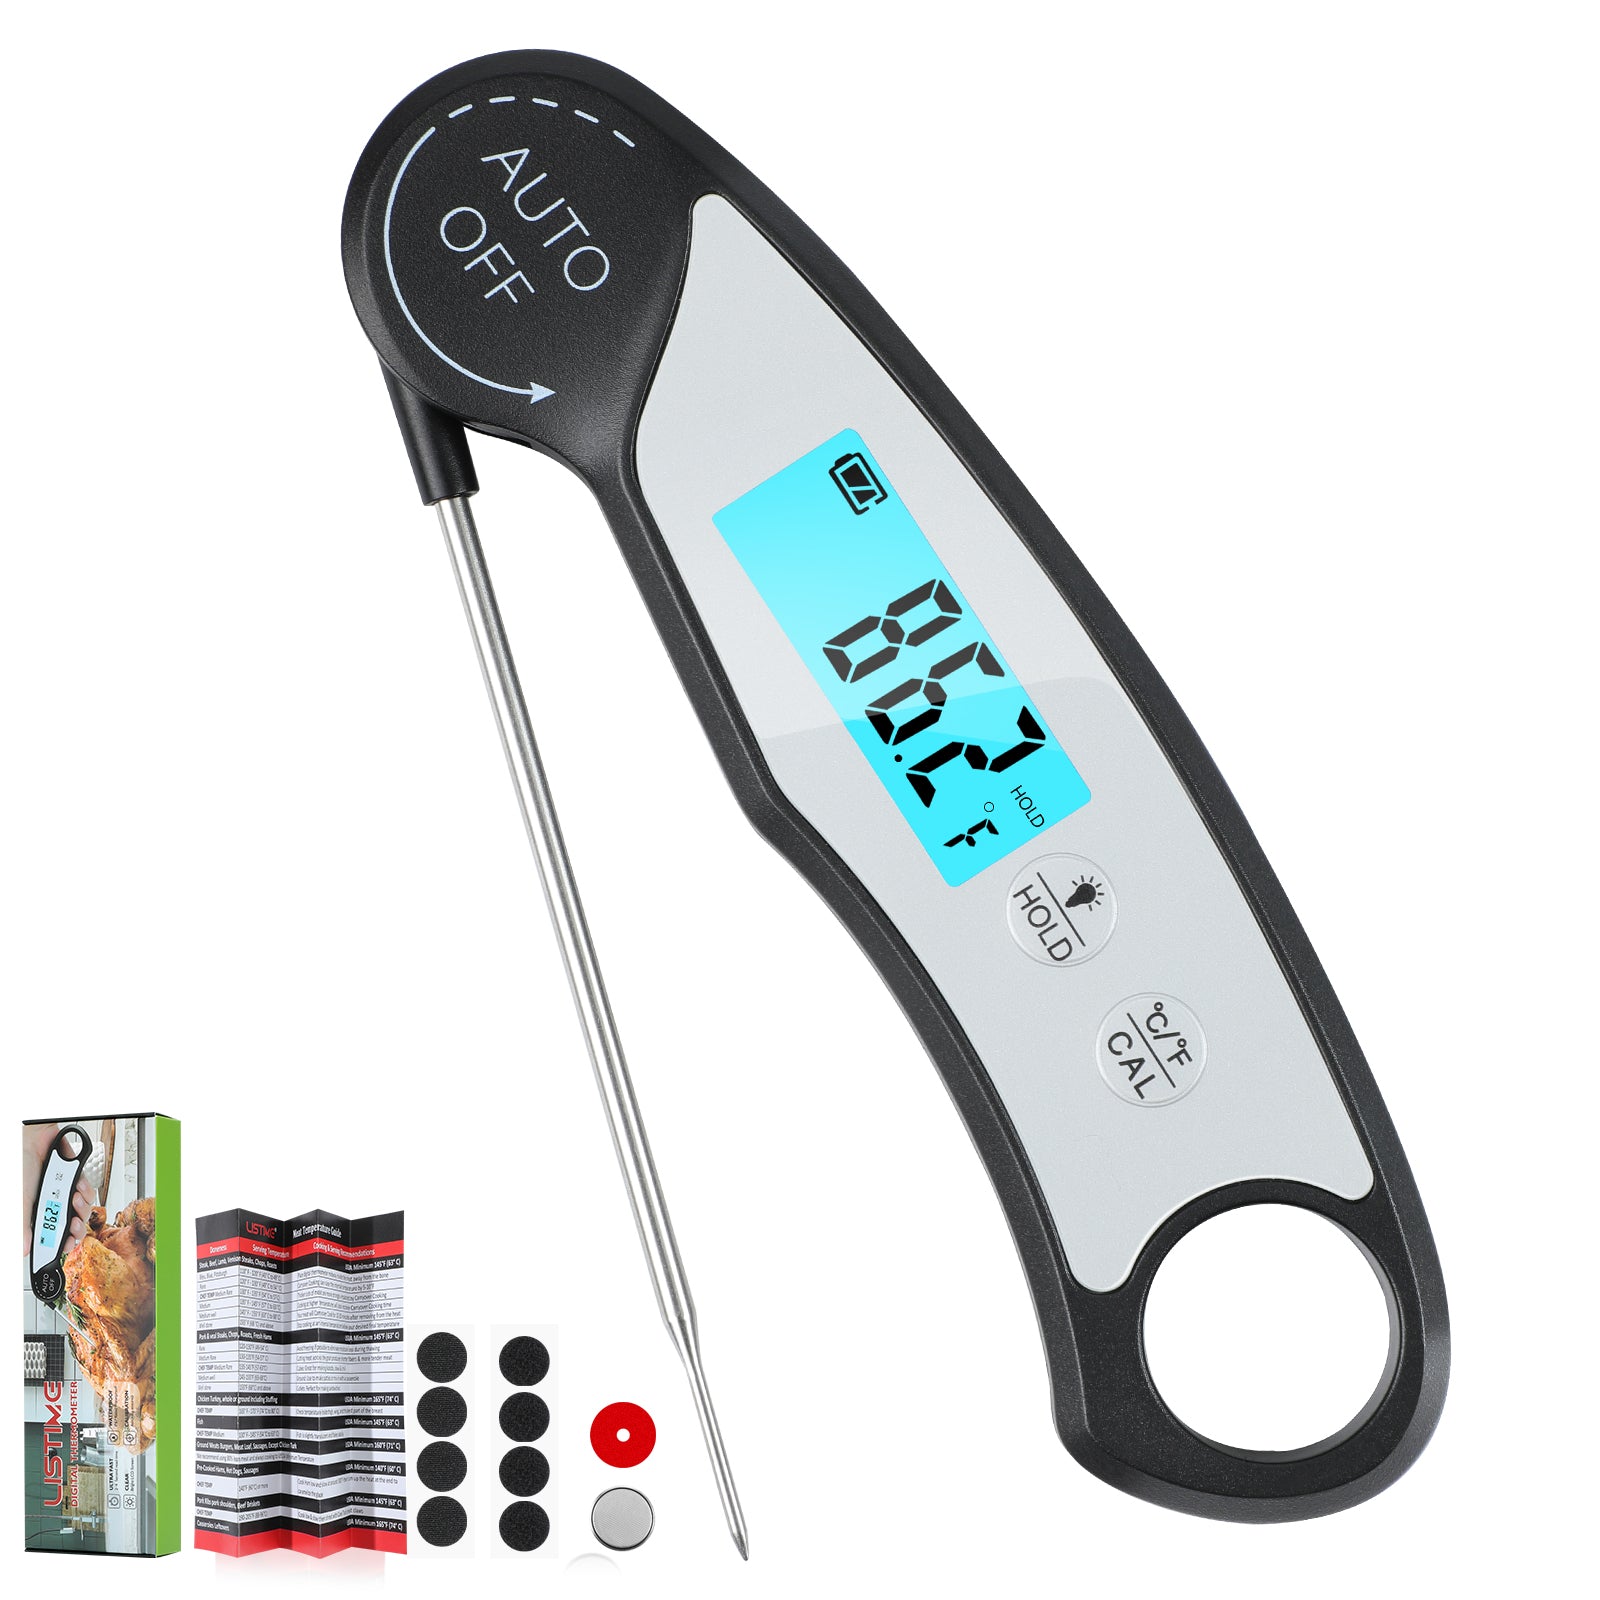  ROUUO Meat Thermometer Digital for Cooking-Backlight